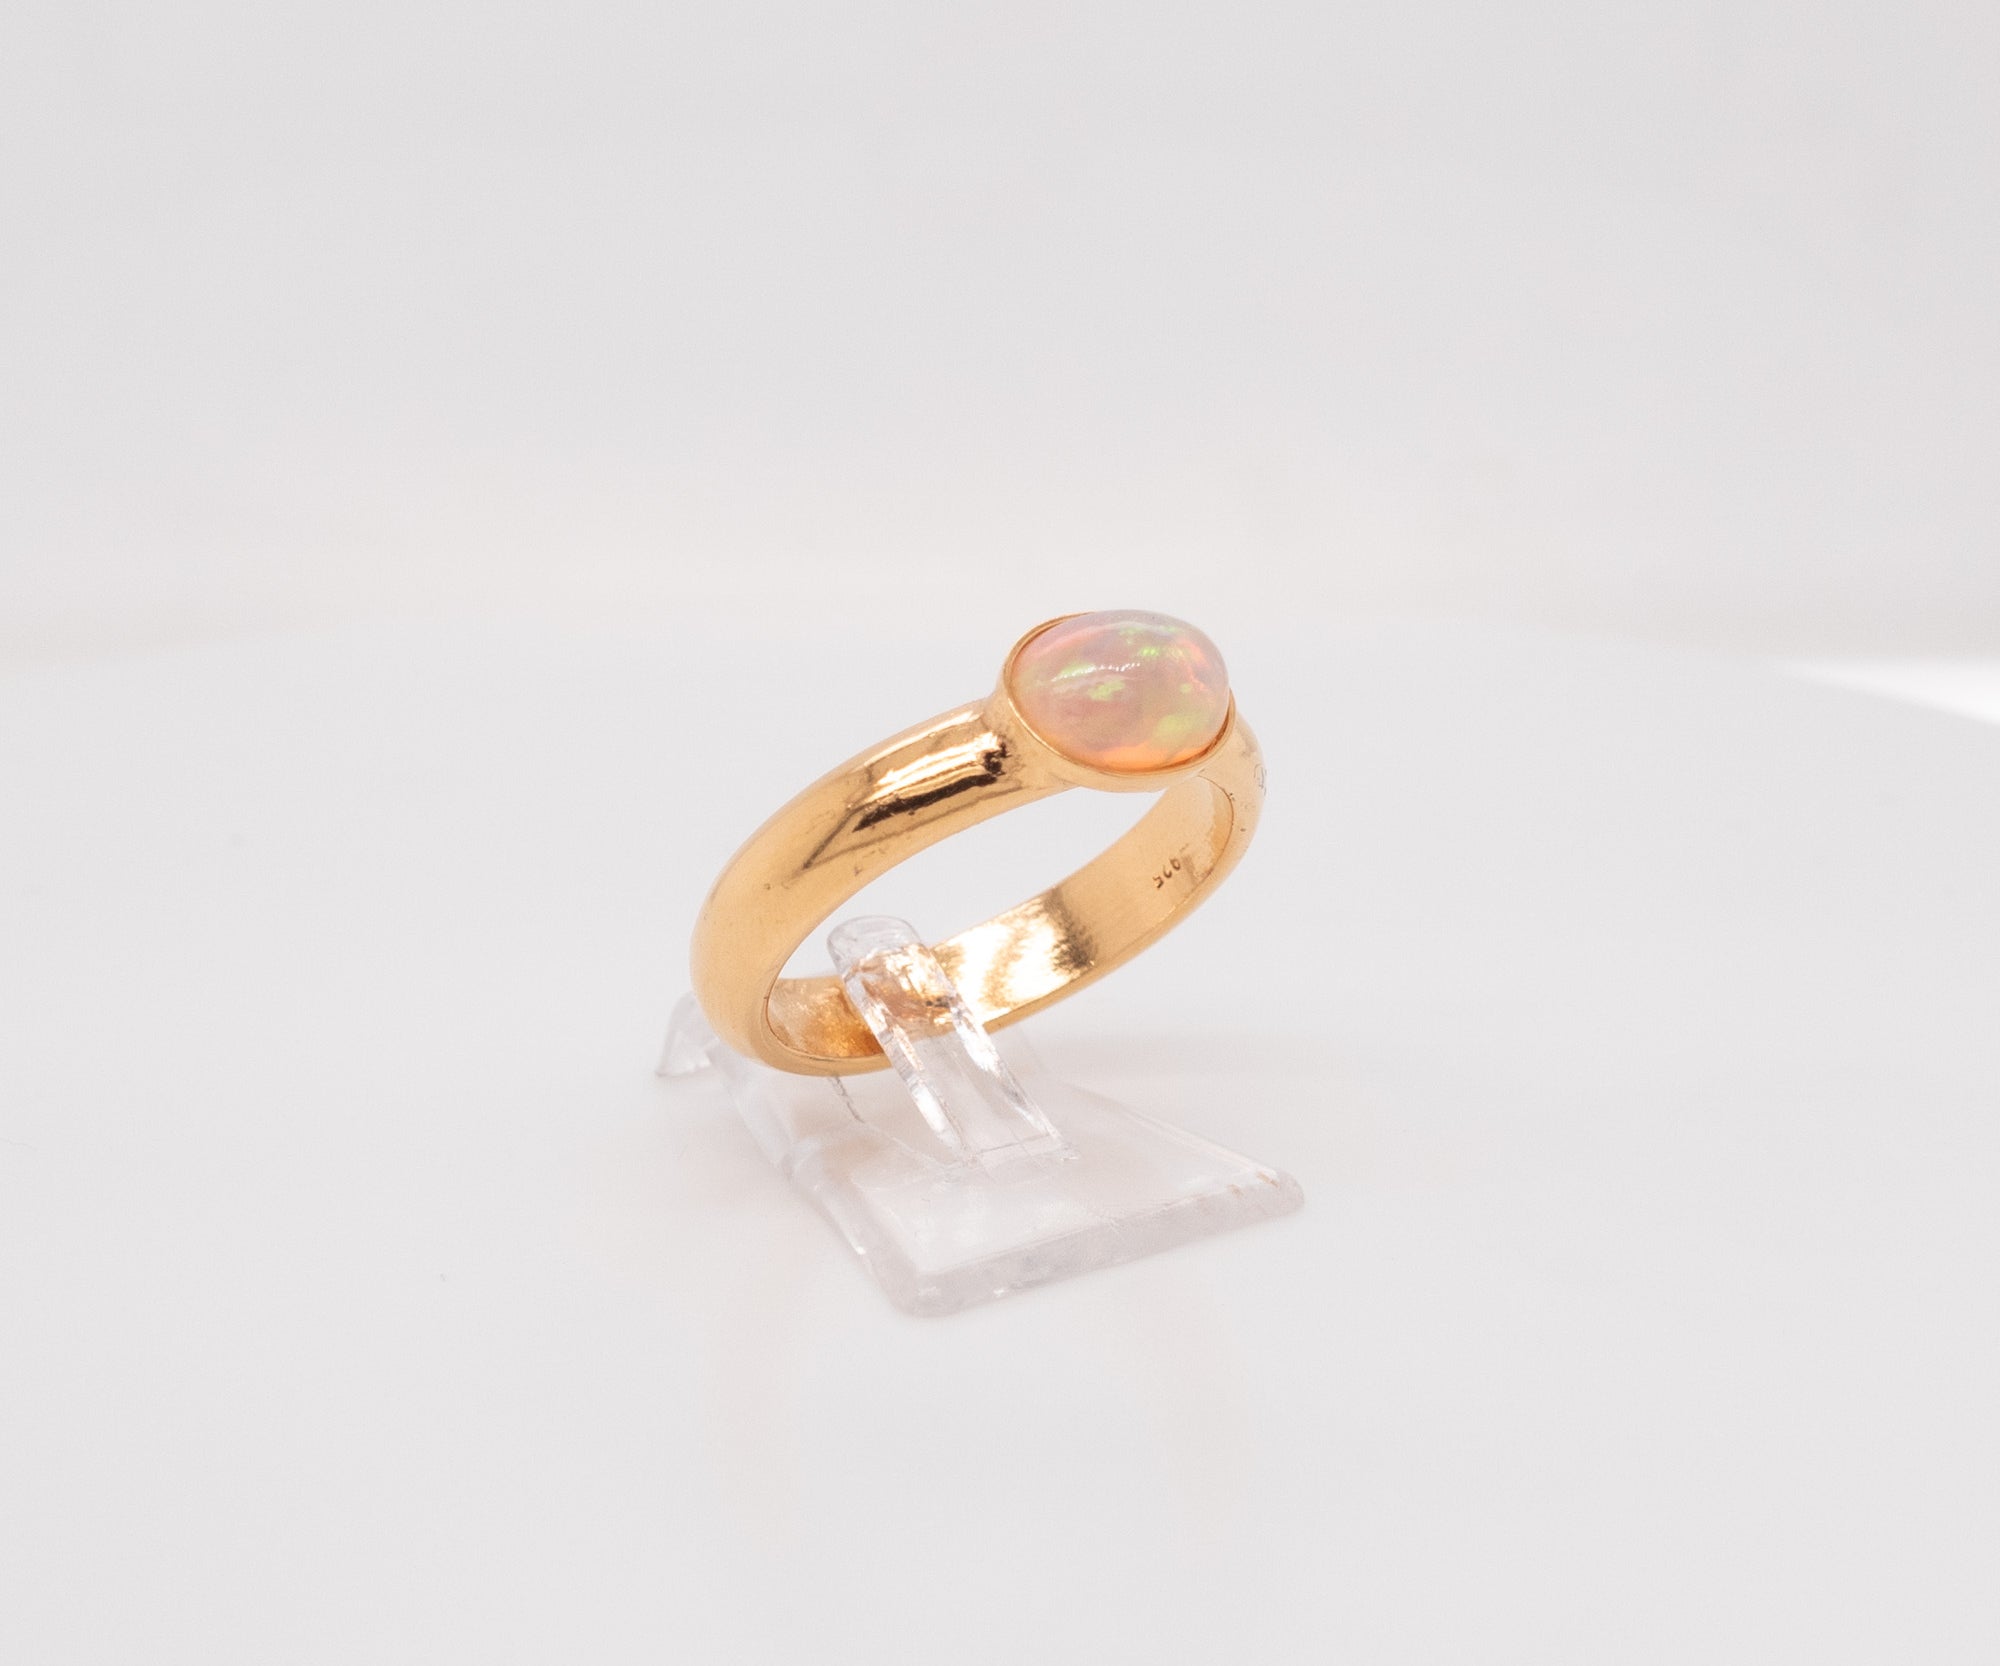 OPHELIA – Ring mit Opal